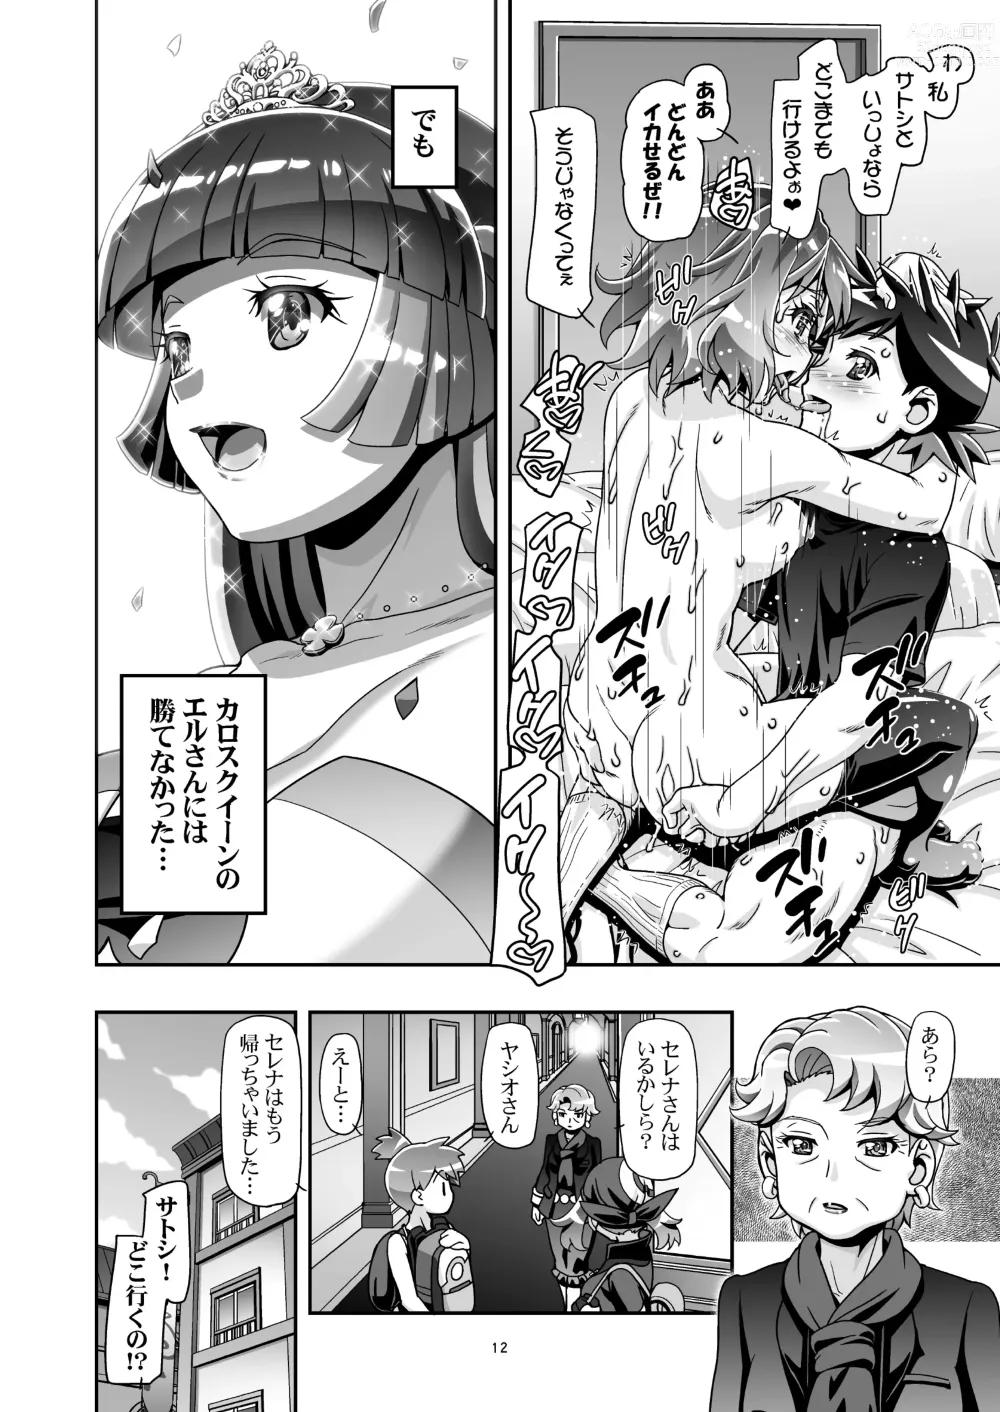 Page 11 of doujinshi PM GALS Serena Final Stage